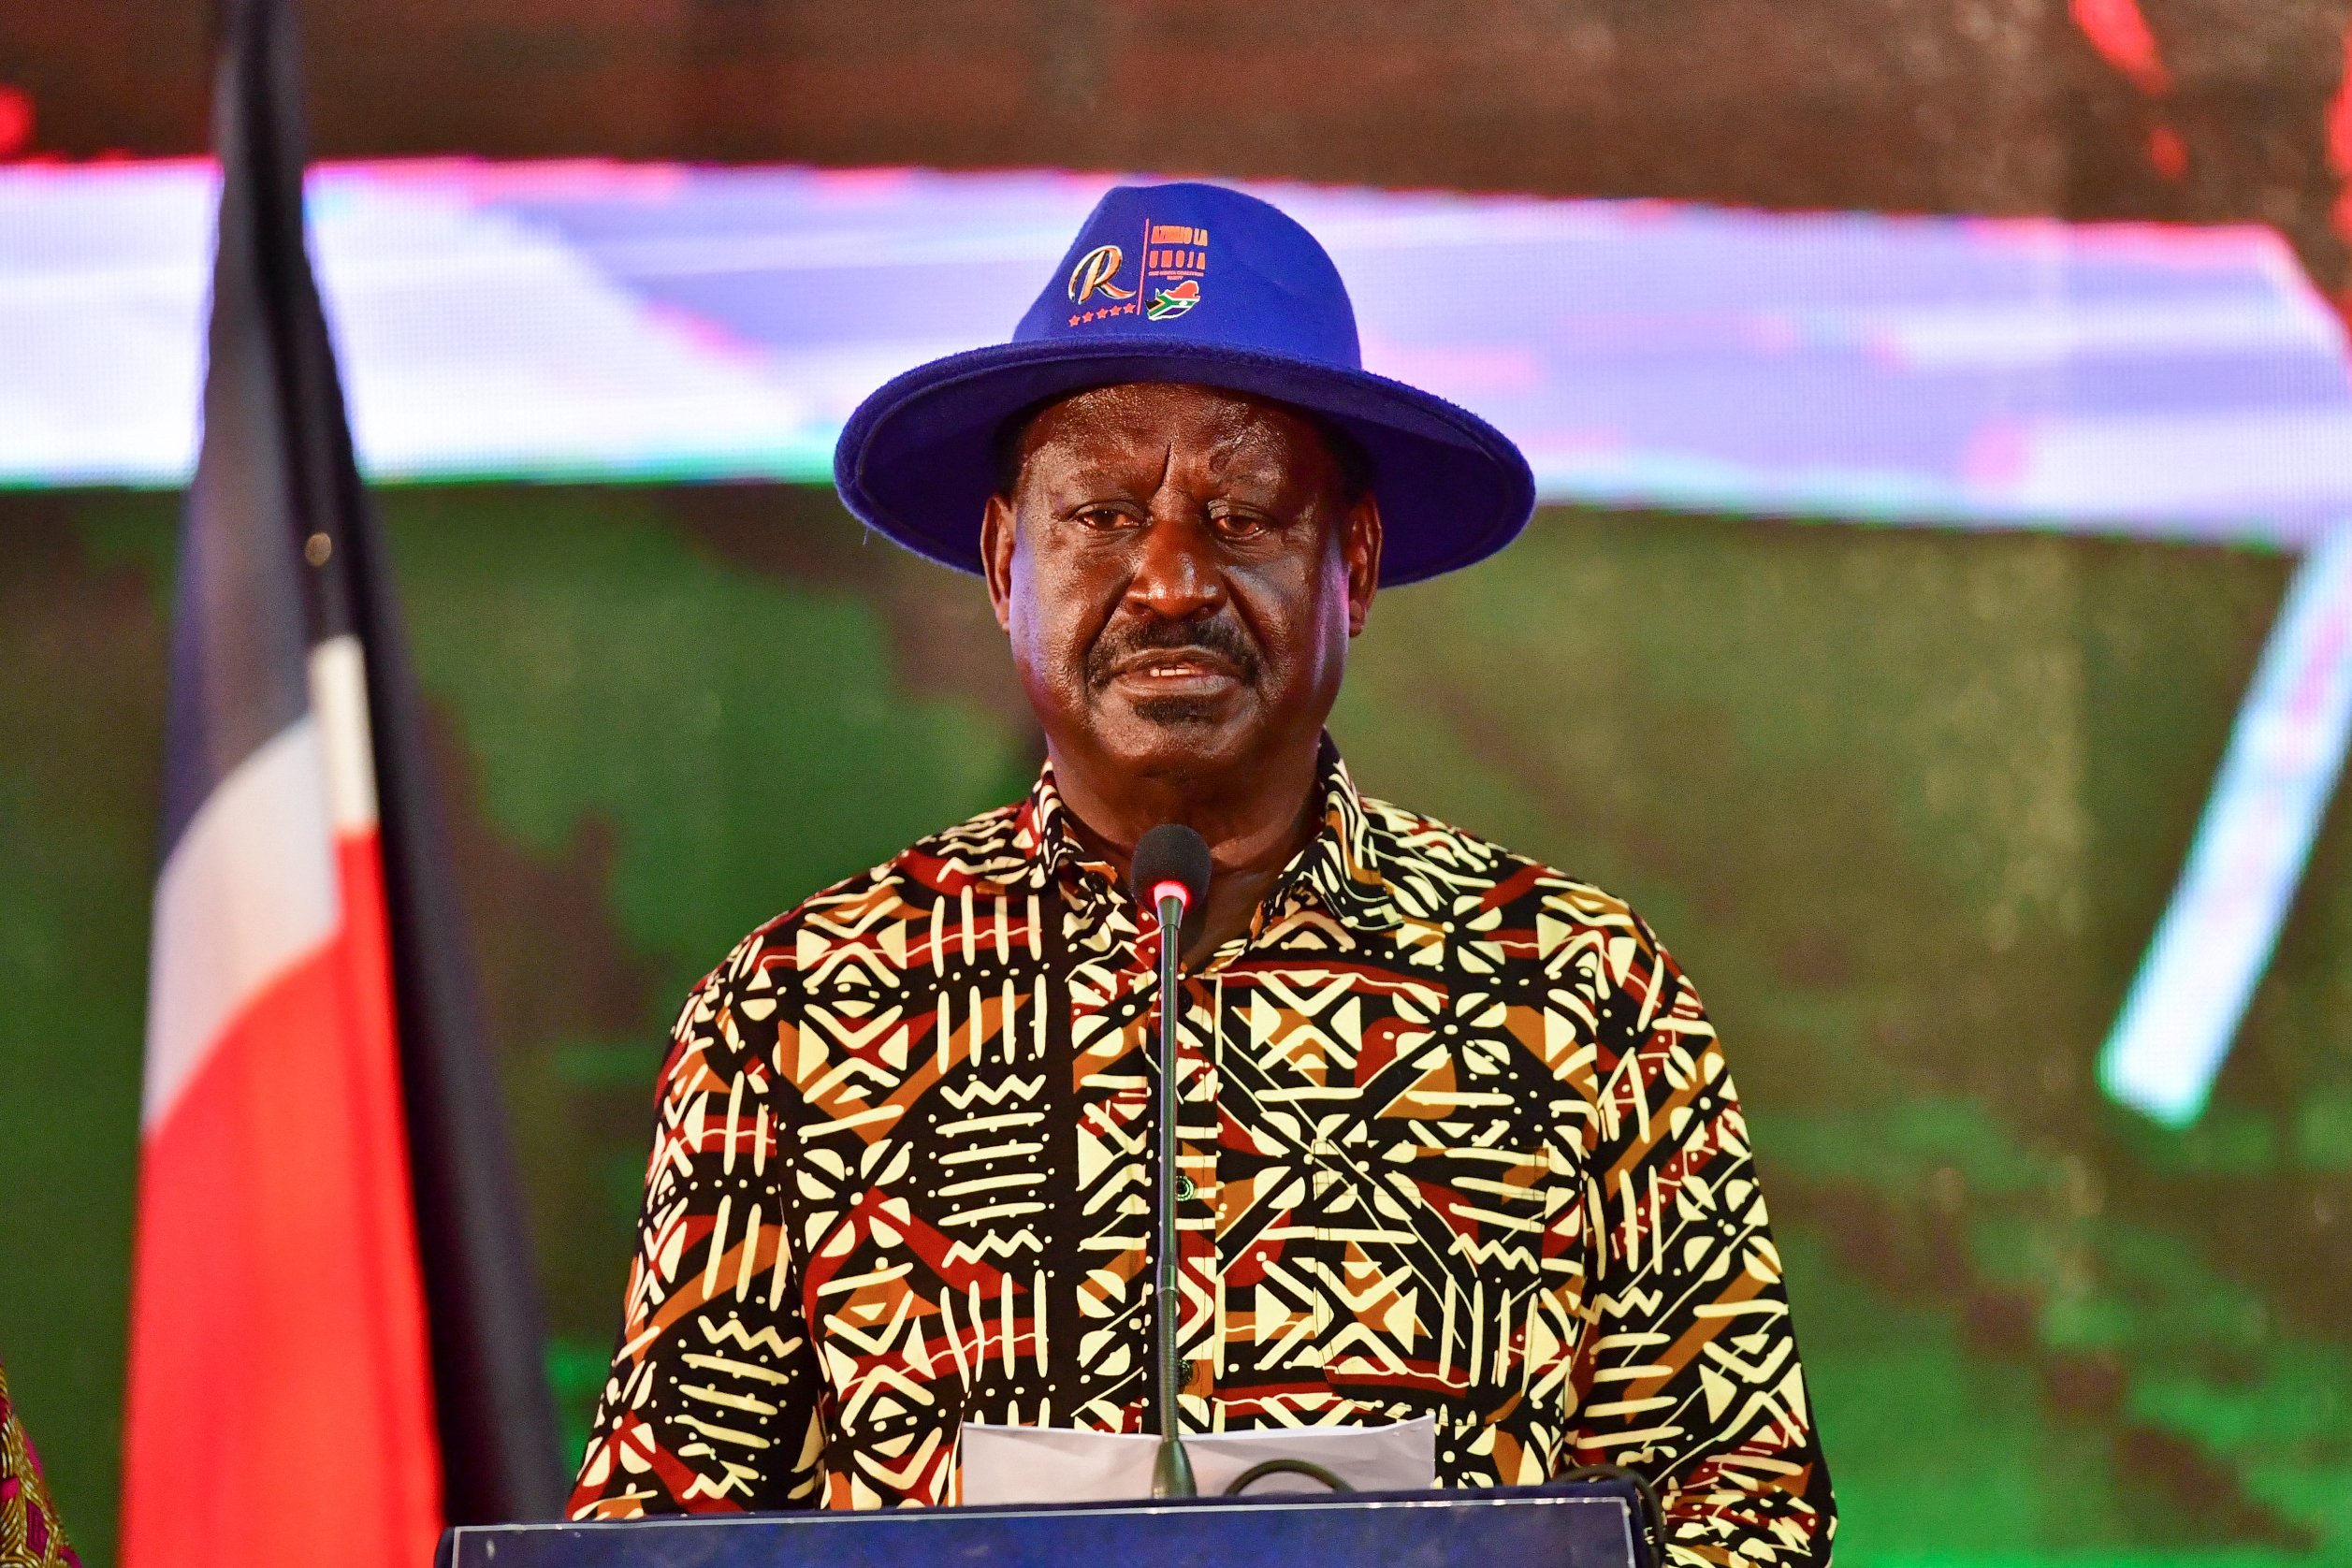 Kenyan opposition leader Raila Odinga denounced the “many flaws” in the recently concluded presidential elections, stating that “what we saw yesterday is a travesty and a blatant disregard of the Constitution” and vowed to “pursue all legal options” to challenge the results in the Supreme Court.